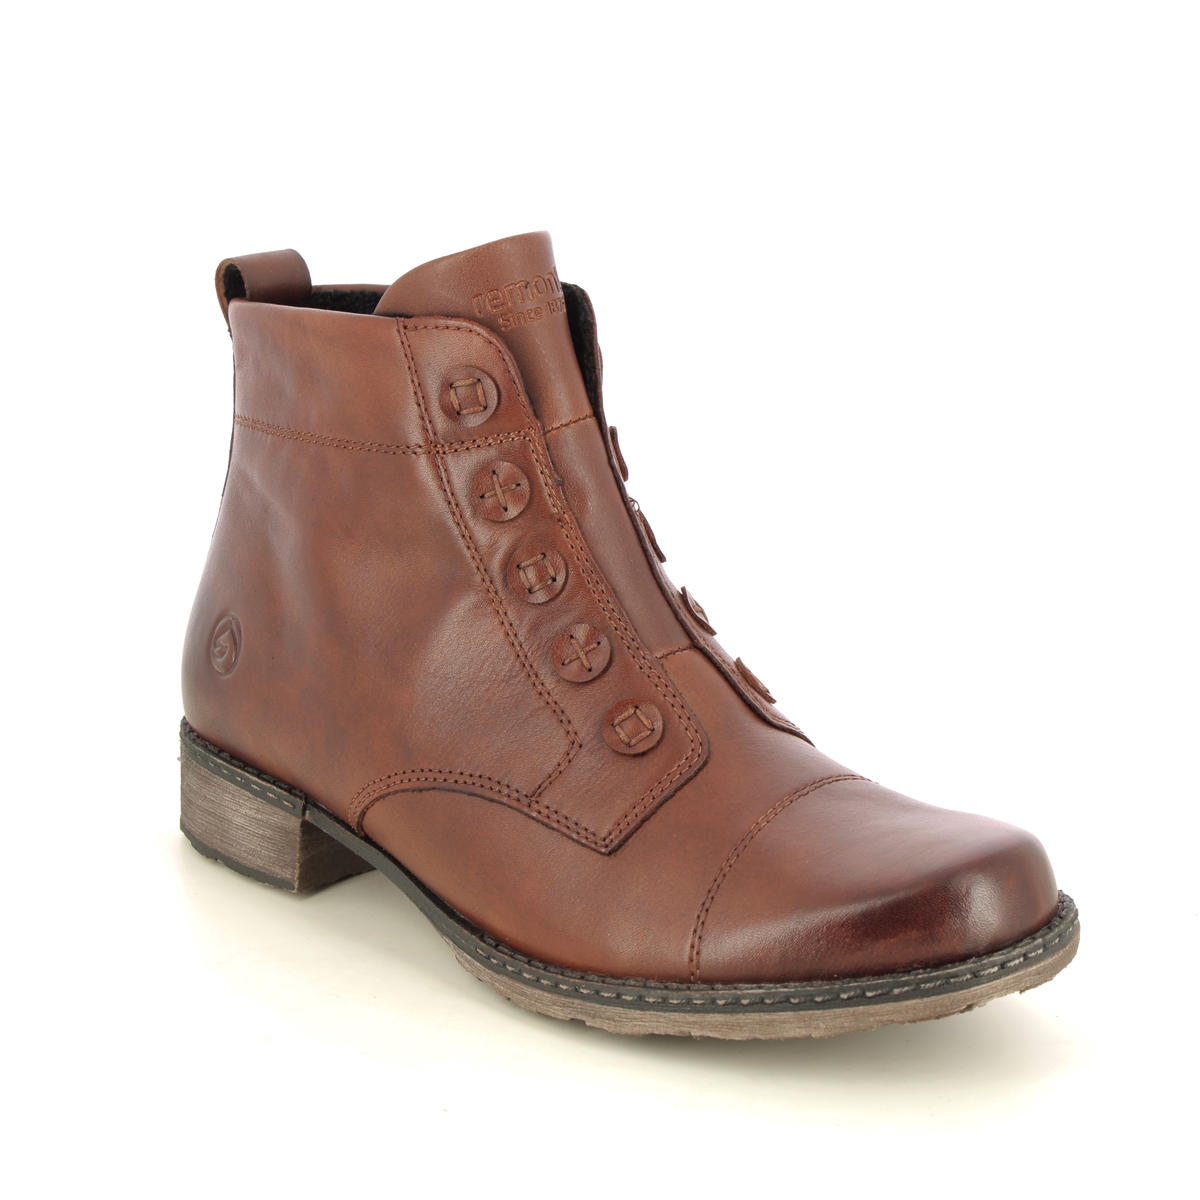 Remonte Peesibut Brown Leather Womens Ankle Boots D4392-22 In Size 41 In Plain Brown Leather